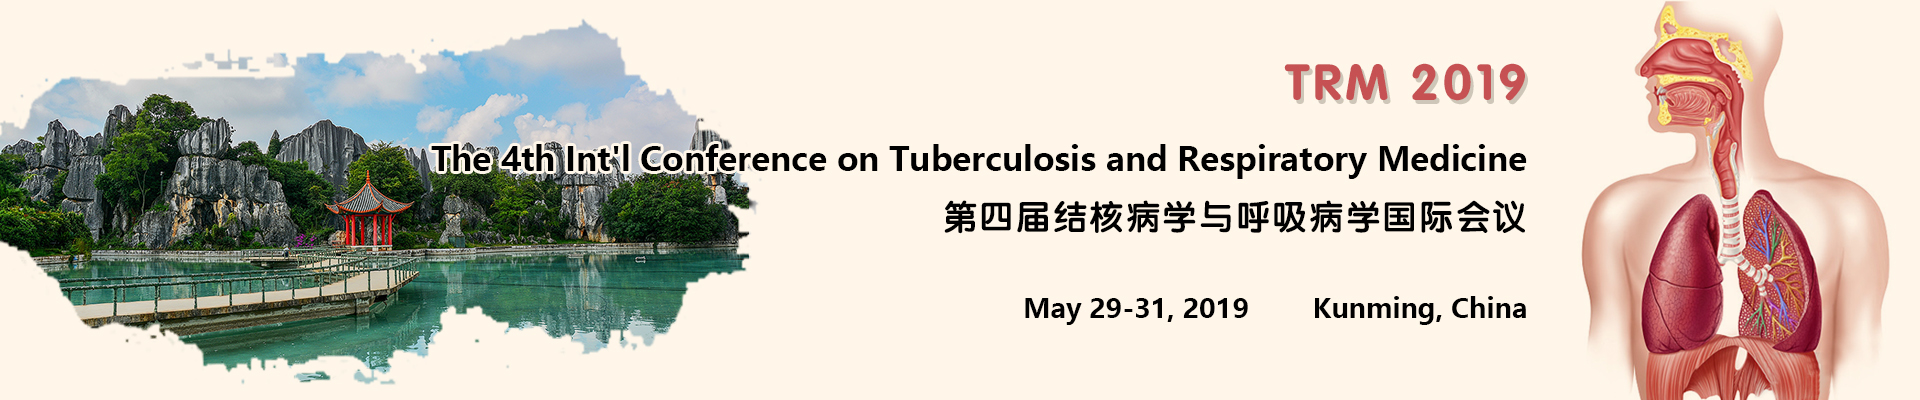 4th Int. Conf. on Tuberculosis and Respiratory Medicine  